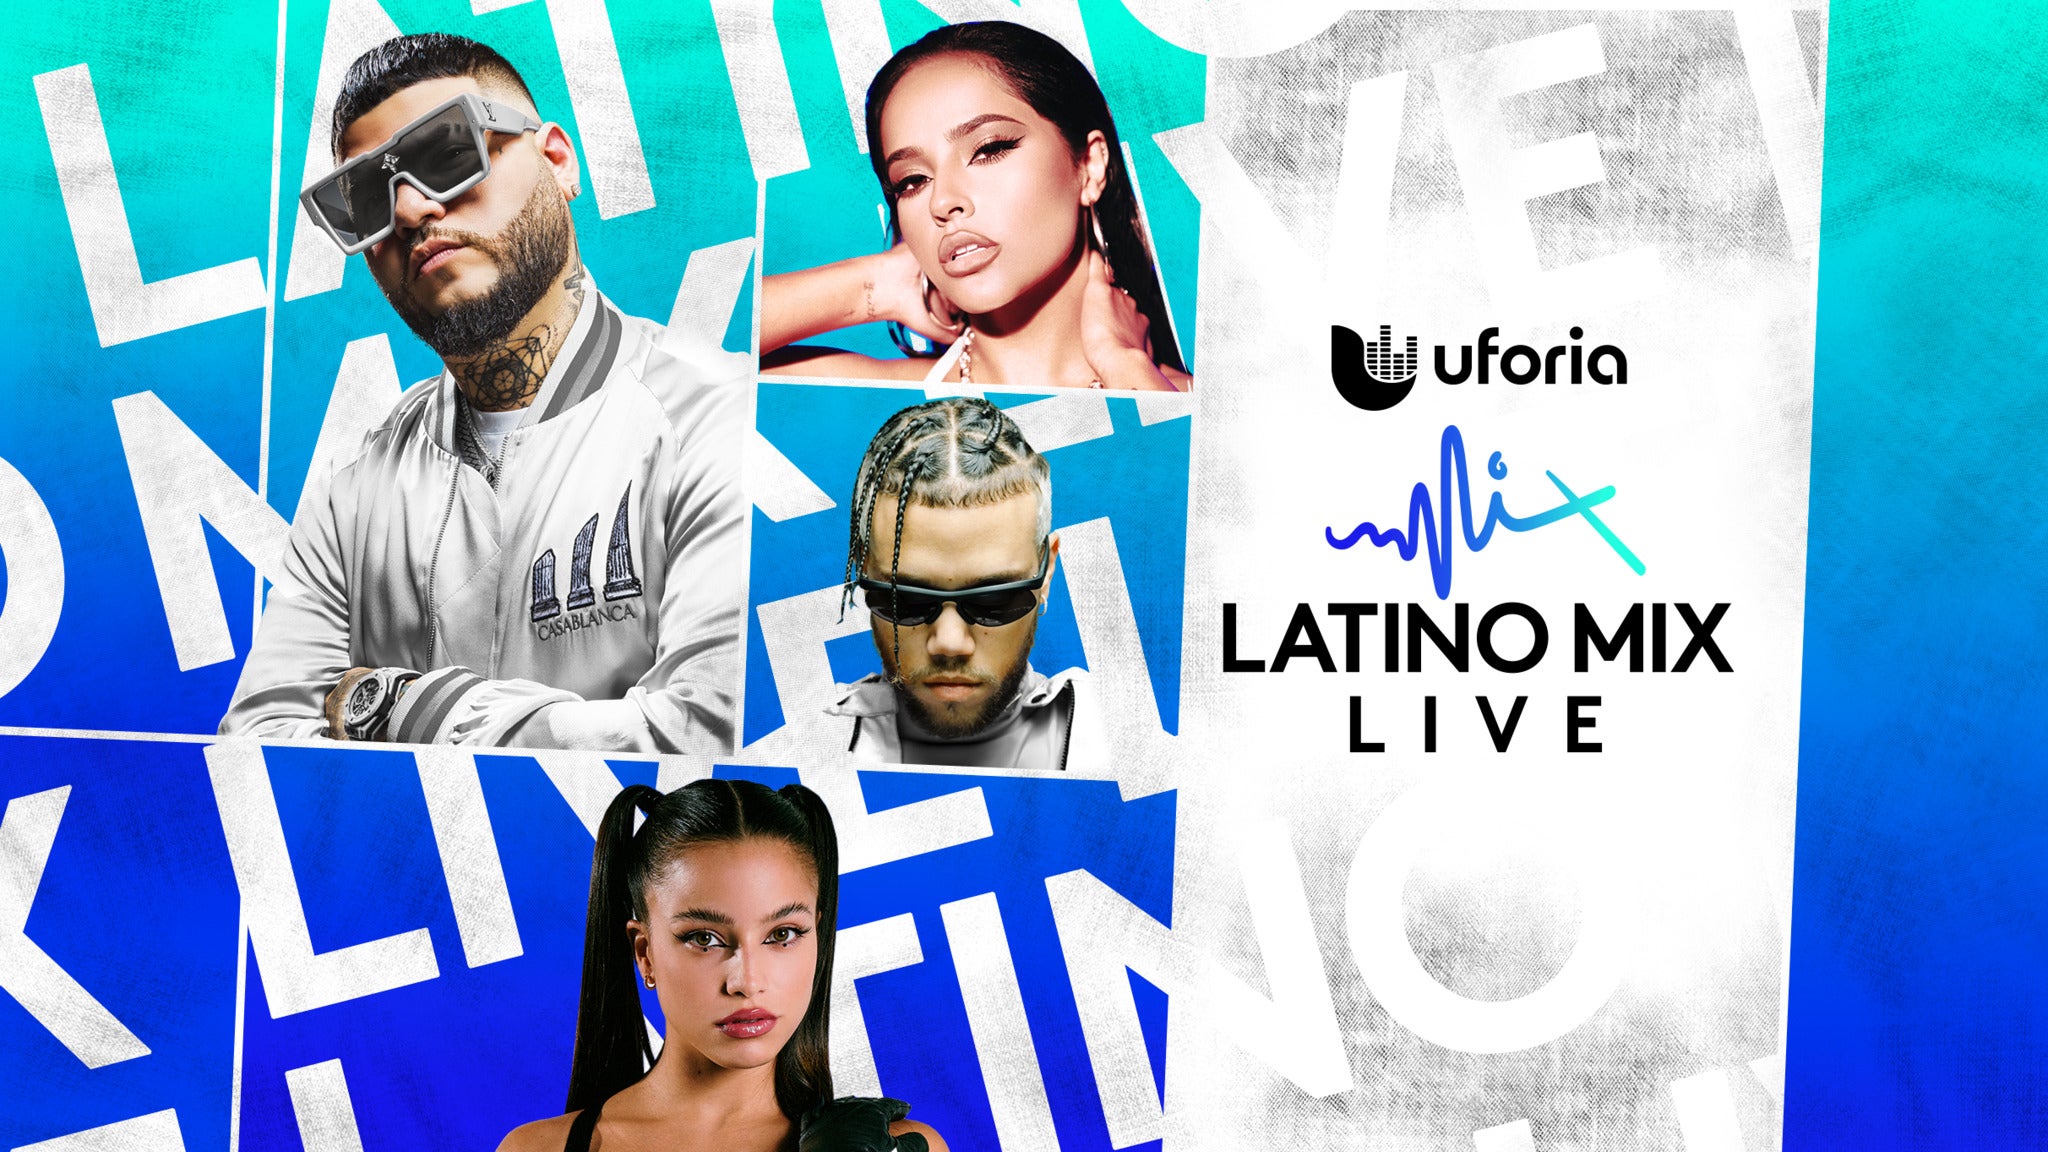 Uforia Latino Mix Live in Phoenix promo photo for Official Platinum Onsale presale offer code